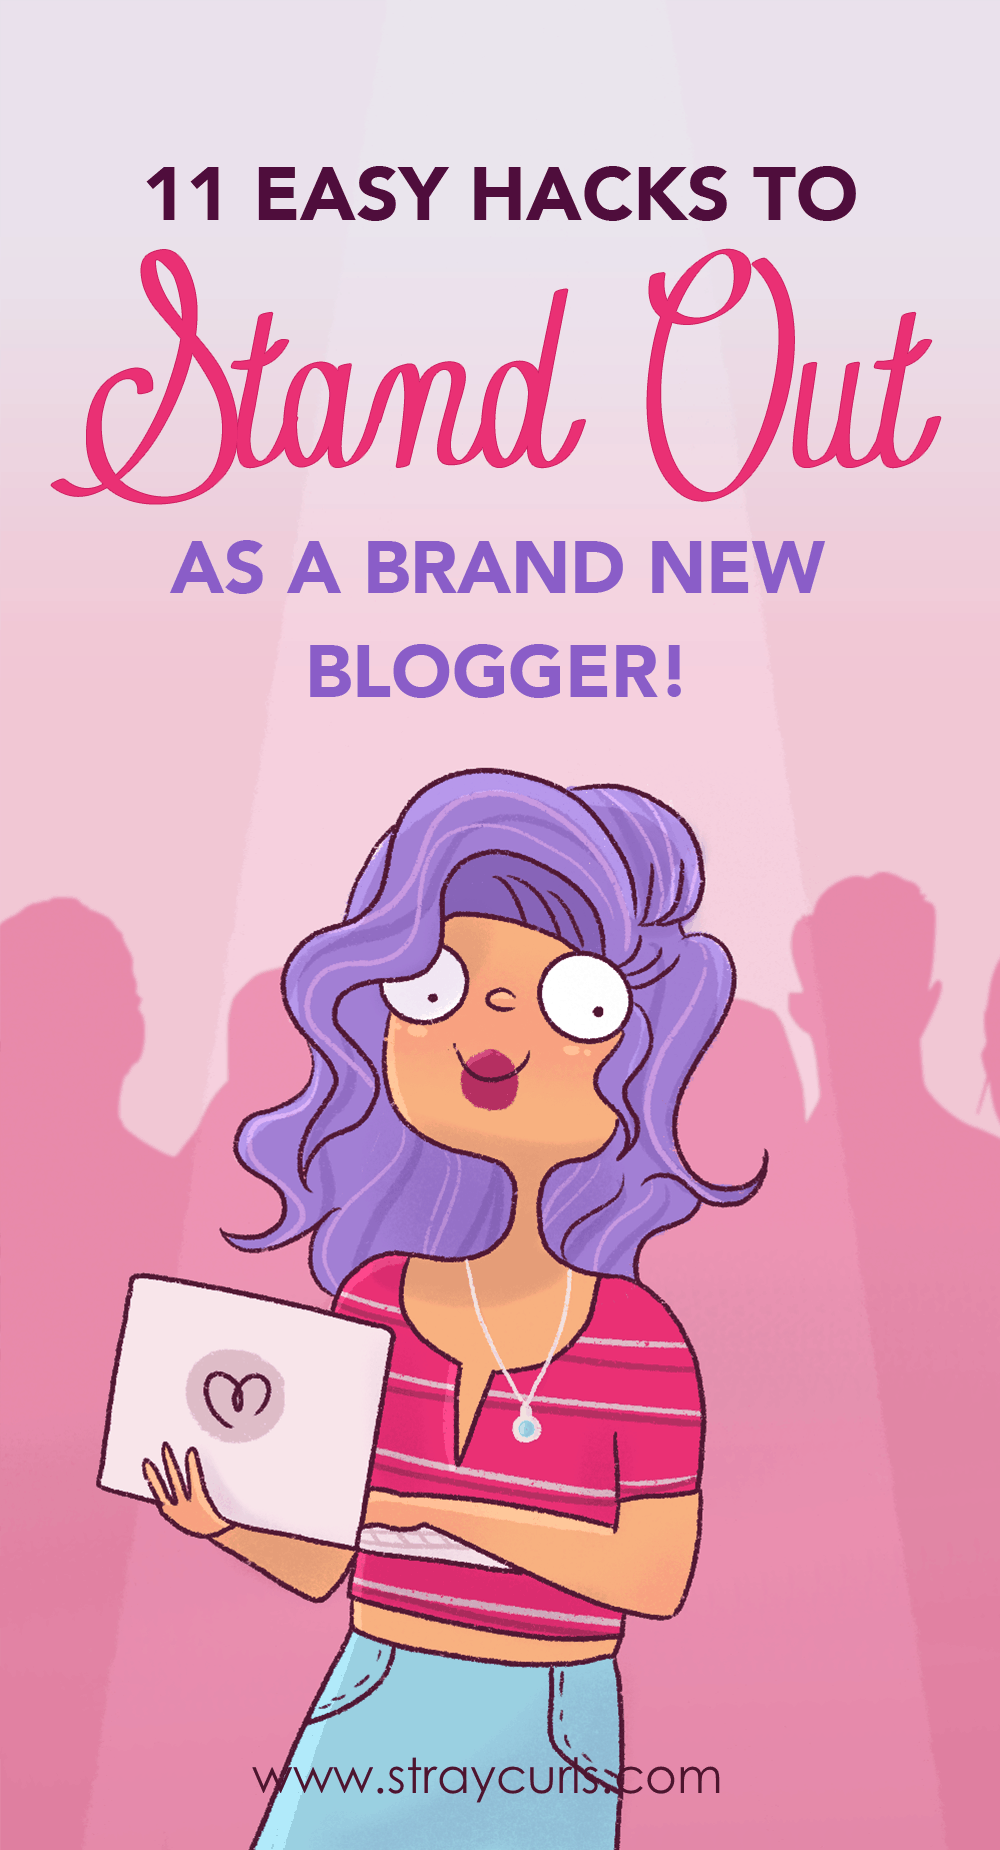 Learn how you can stand out as a blogger in a sea of blogs and get people to read your blog! This post will teach you to stand out in a crowded niche. #blog #bloggingtips #newbieblogger #tips